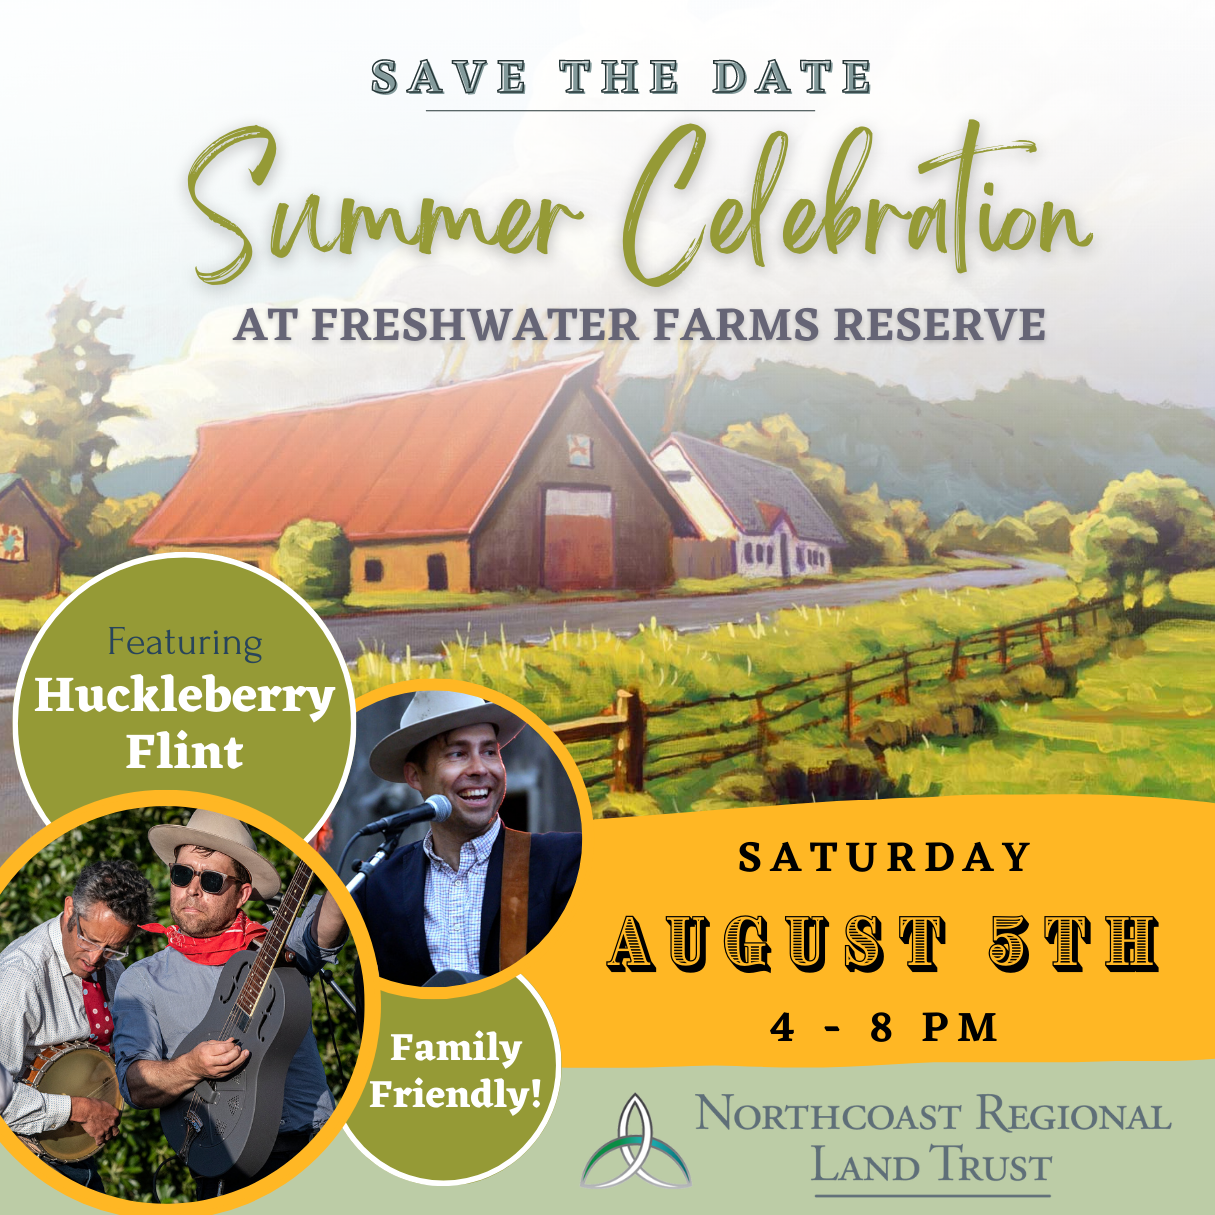 5th Annual Summer Celebration at Freshwater Farms Reserve